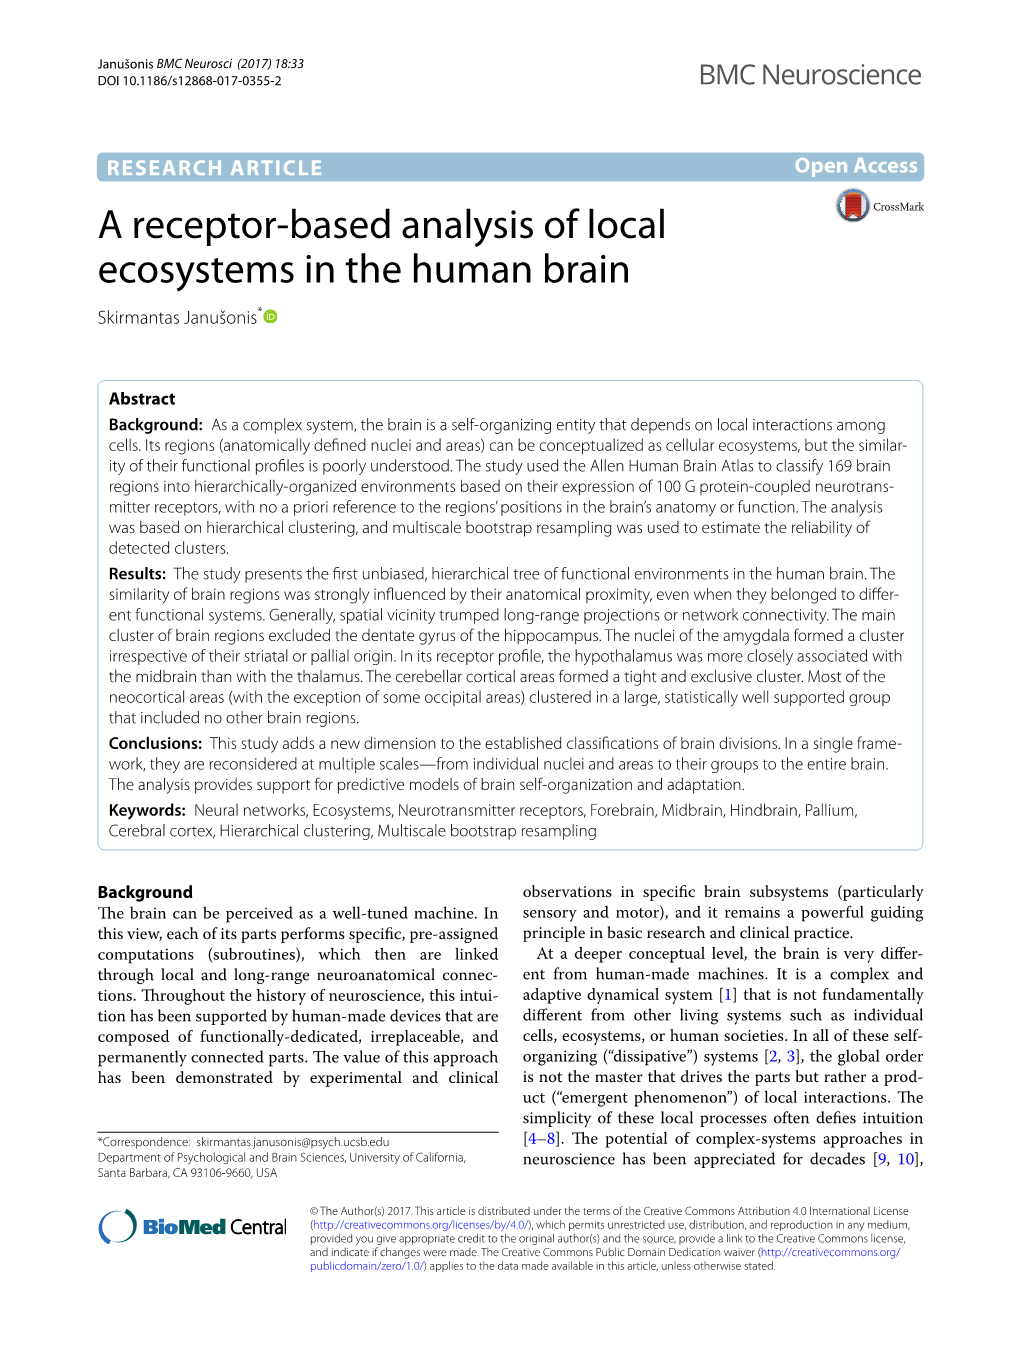 A Receptor-Based Analysis of Local Ecosystems in the Human Brain